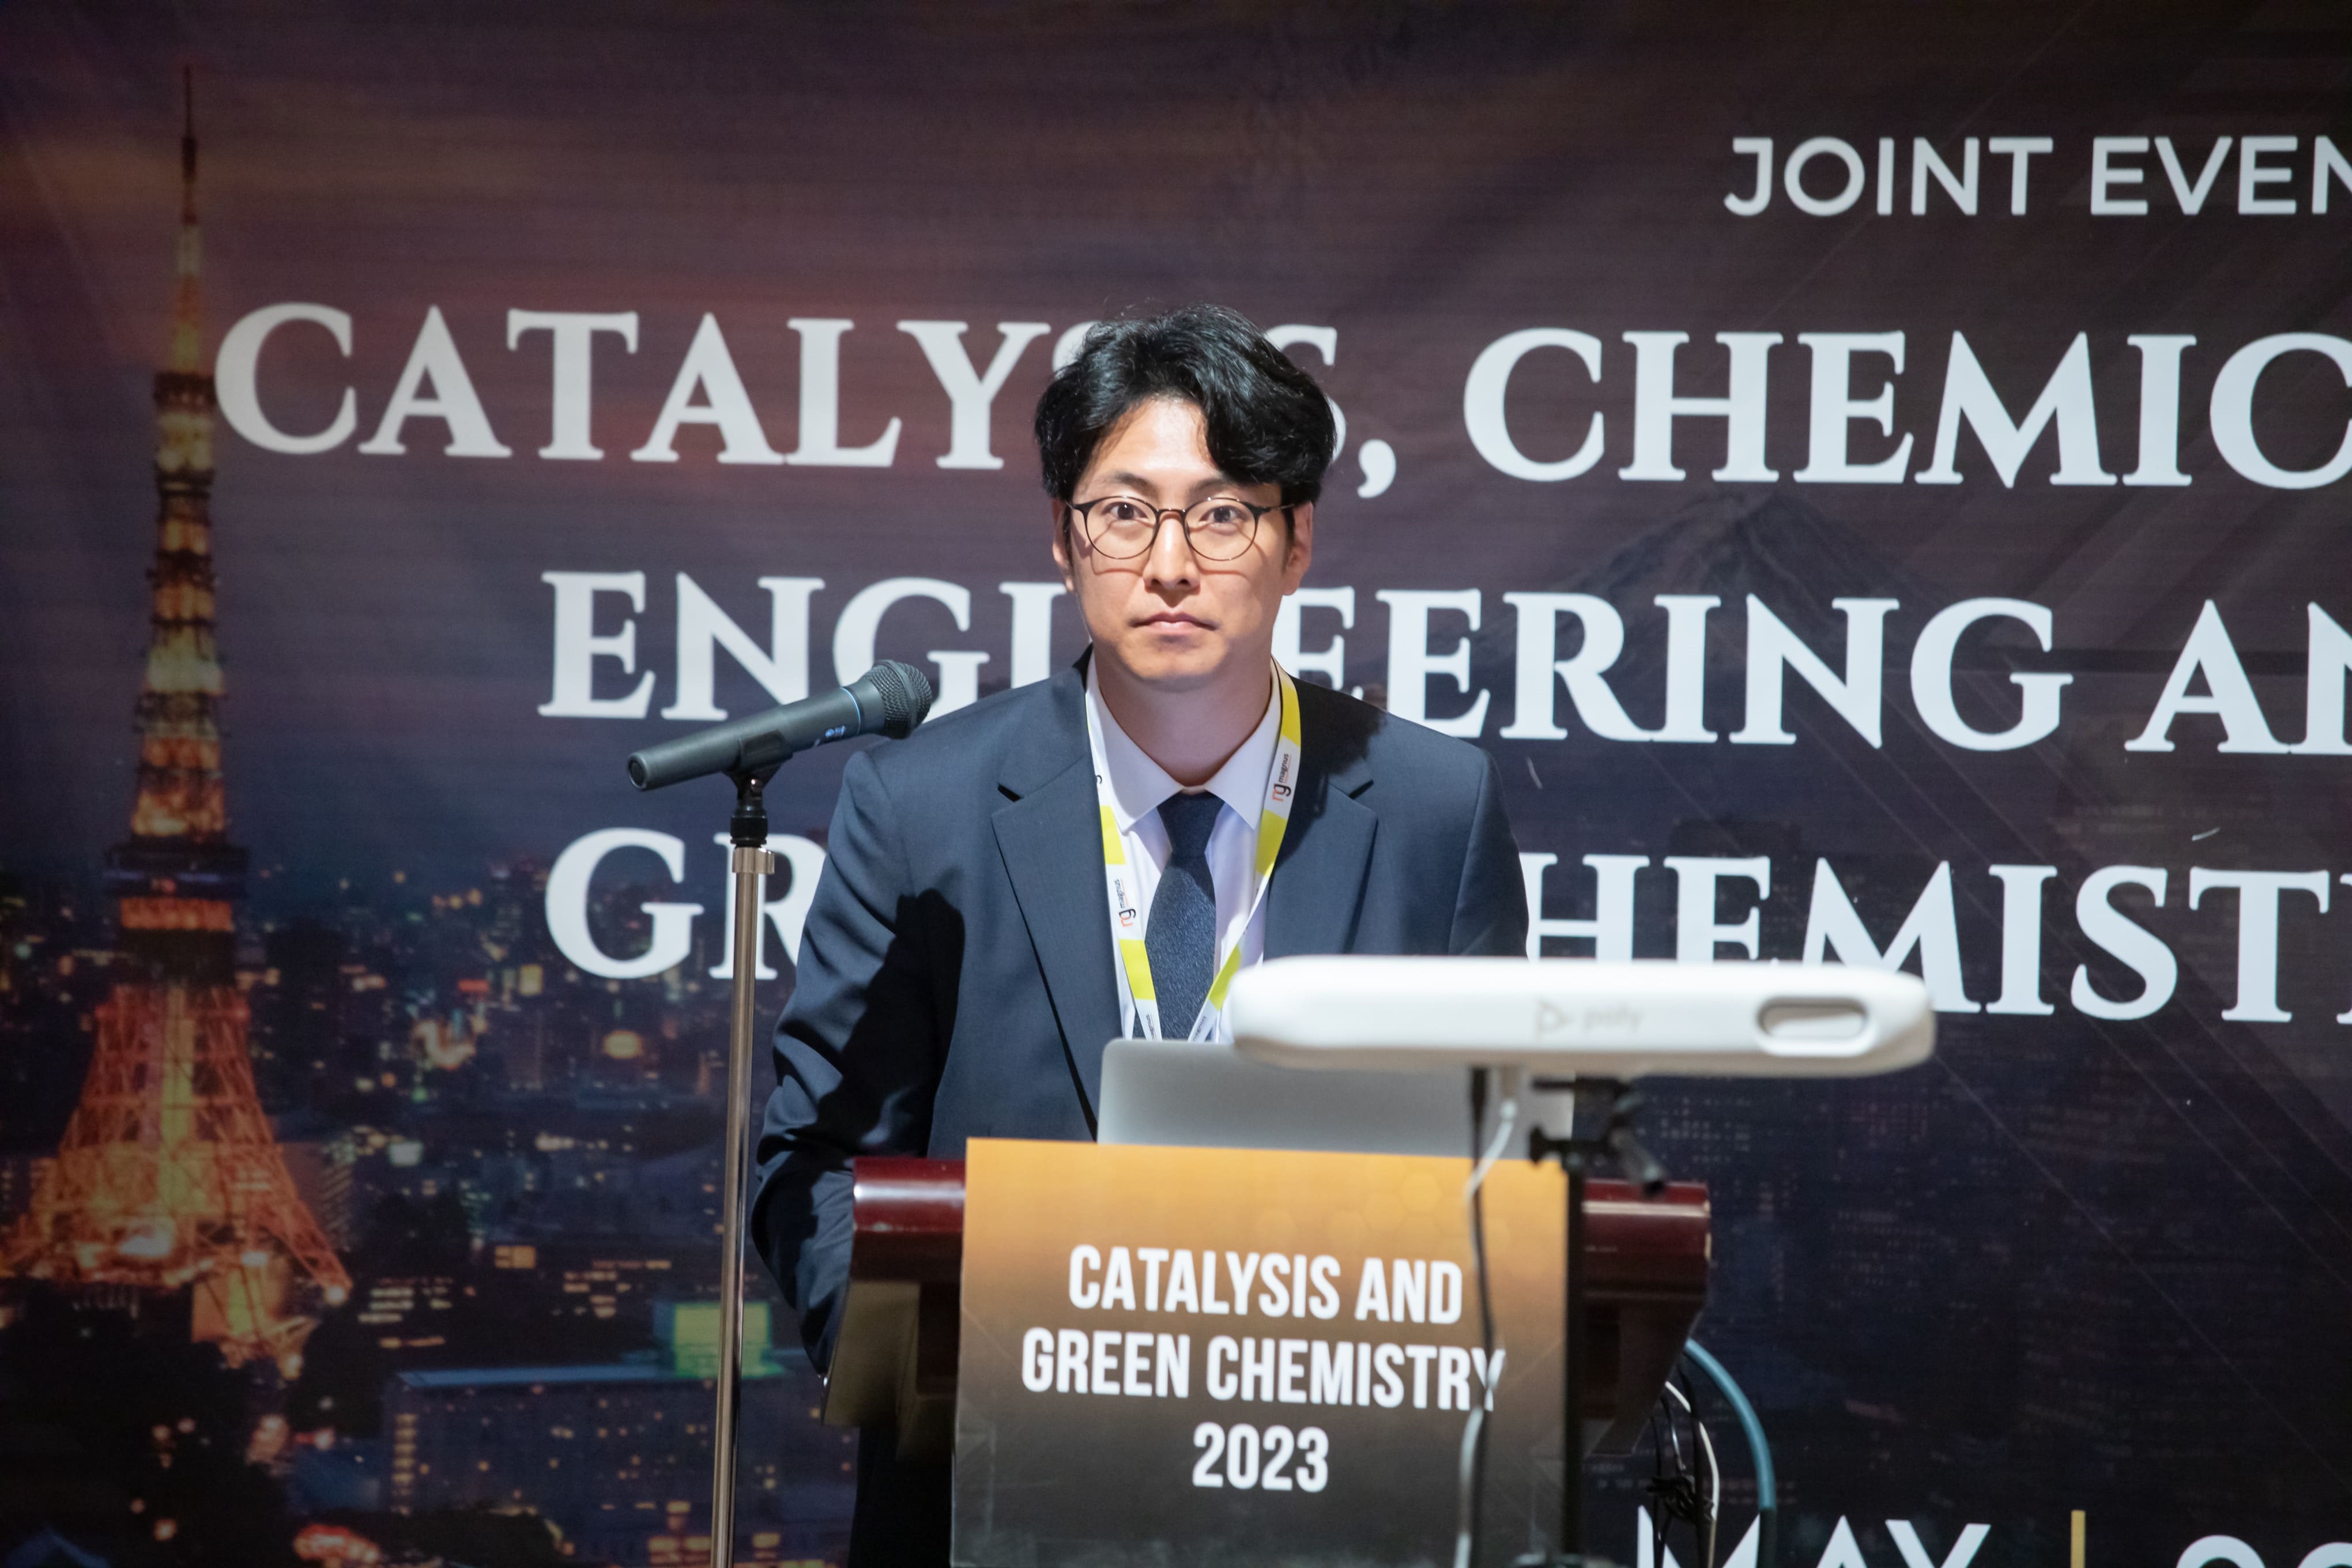 Chemical Engineering Conferences